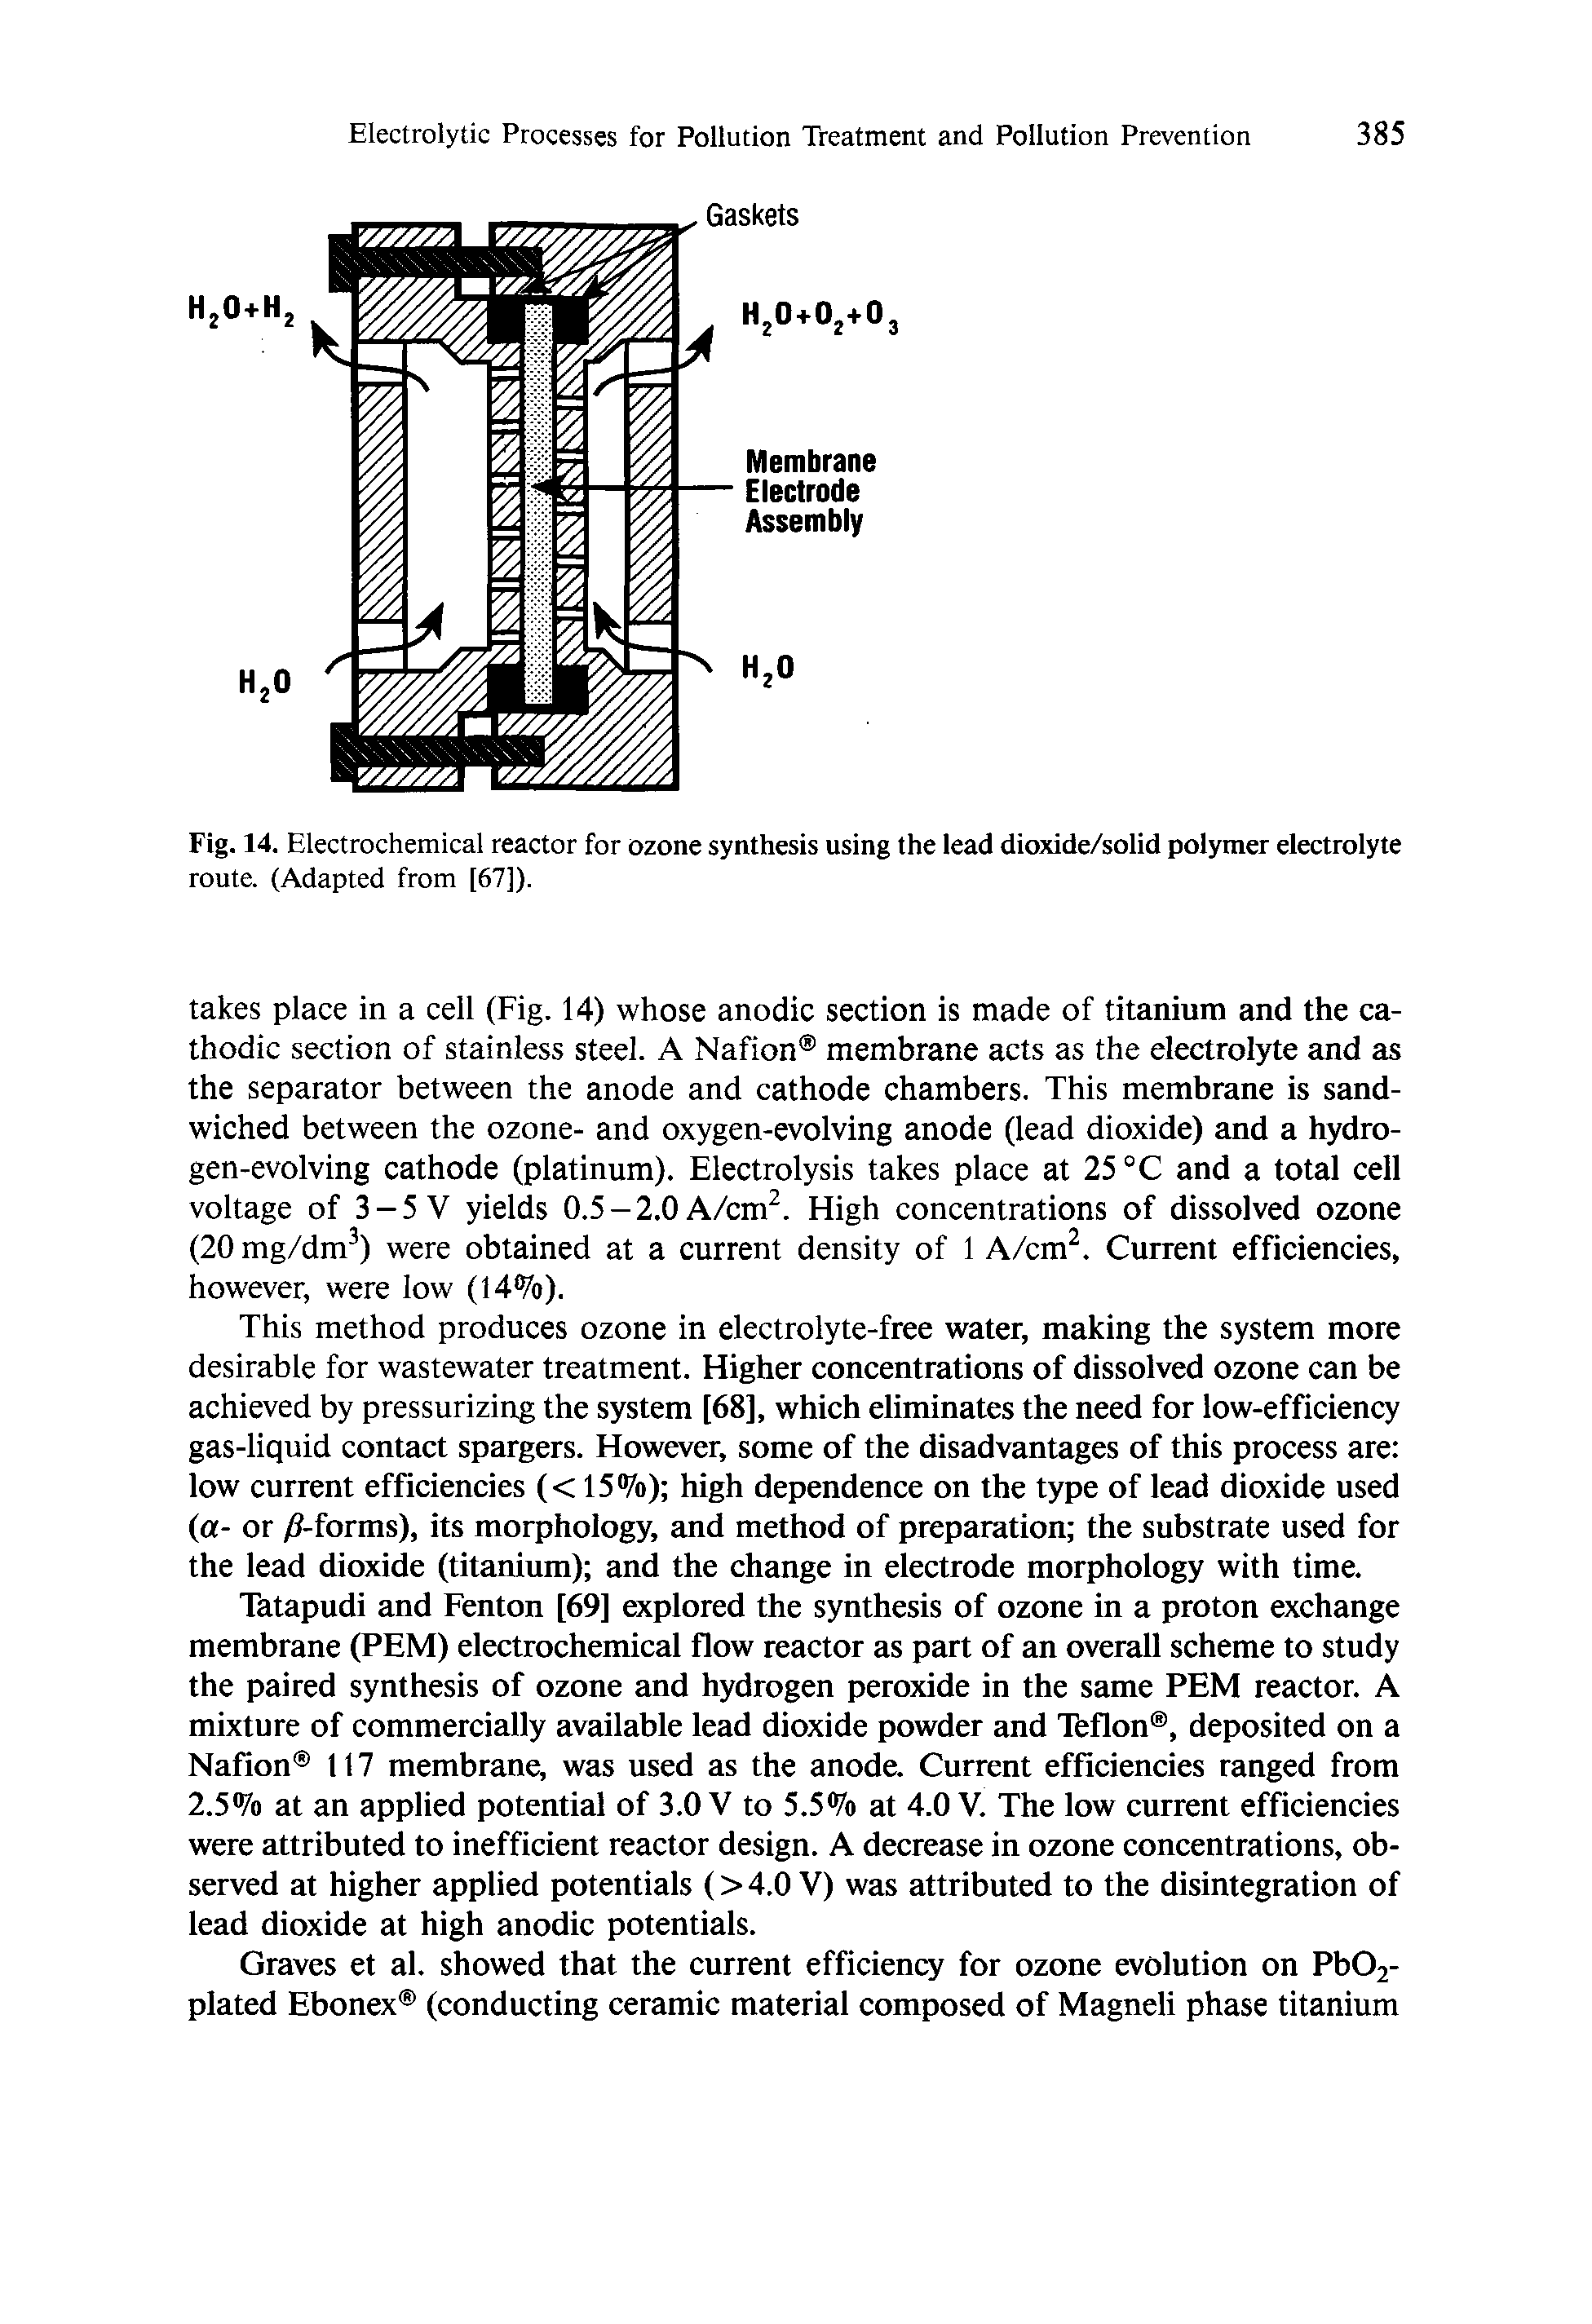 Fig. 14. Electrochemical reactor for ozone synthesis using the lead dioxide/solid polymer electrolyte route. (Adapted from [67]).